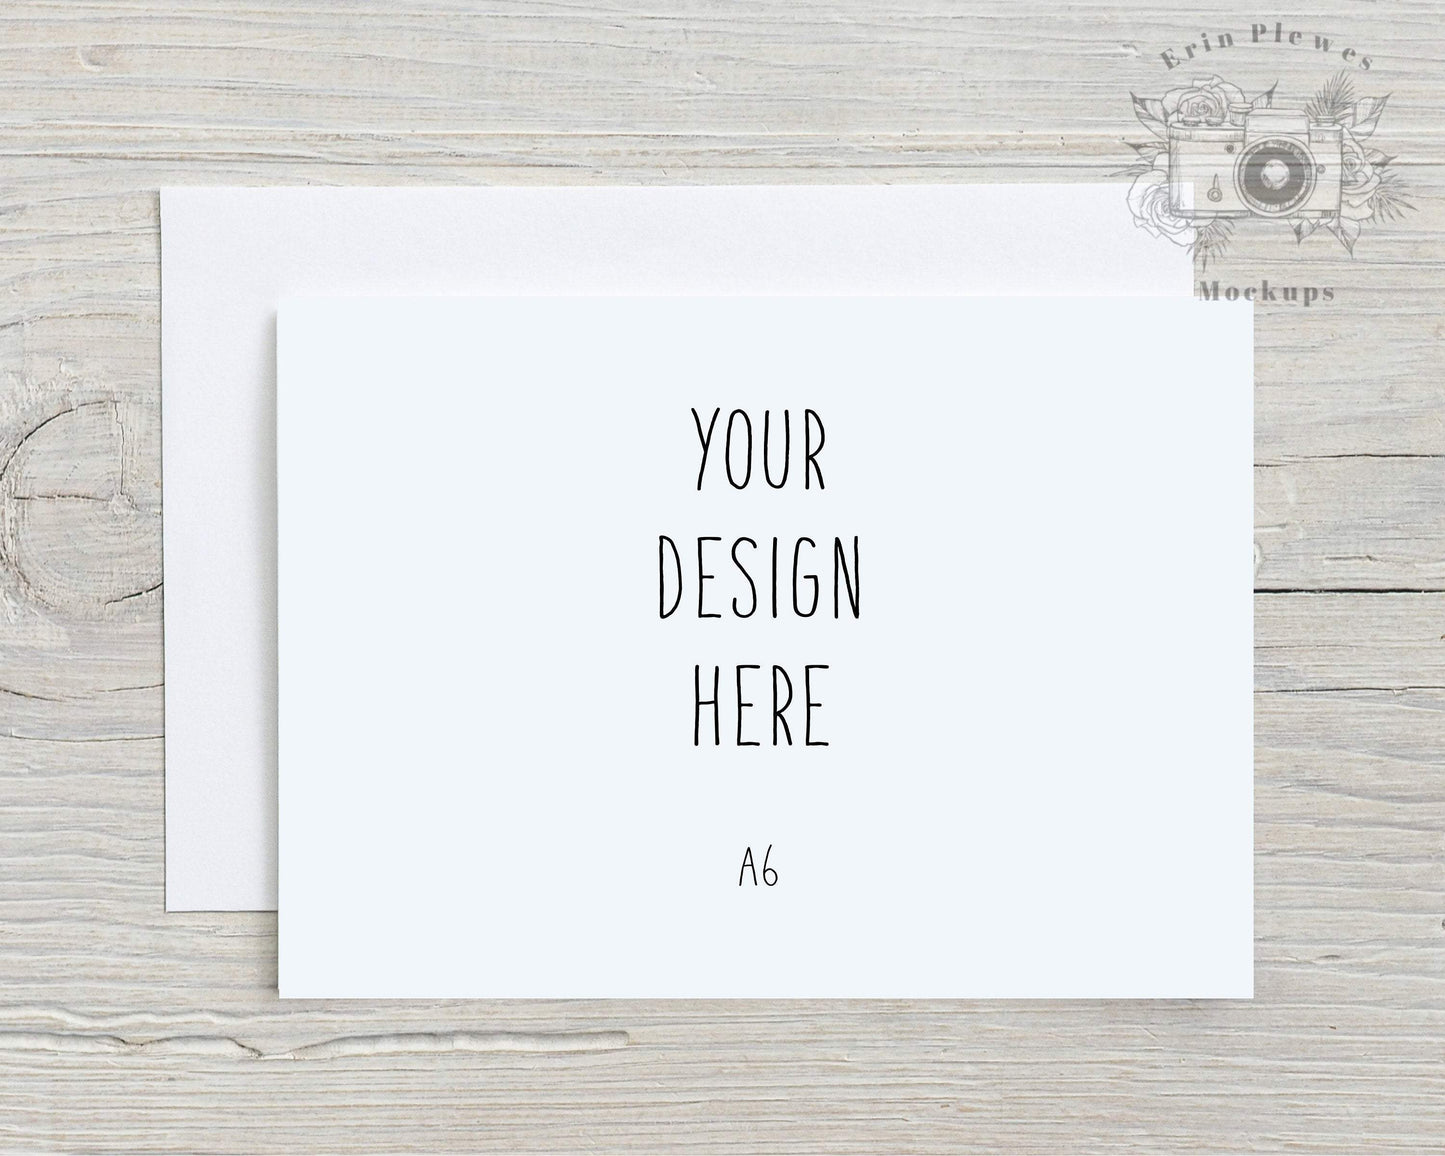 Erin Plewes Mockups Greeting card mockup A6 with white envelope, Invitation mock up for minimalist wedding size A 6, Lifestyle stock photo Jpg Template